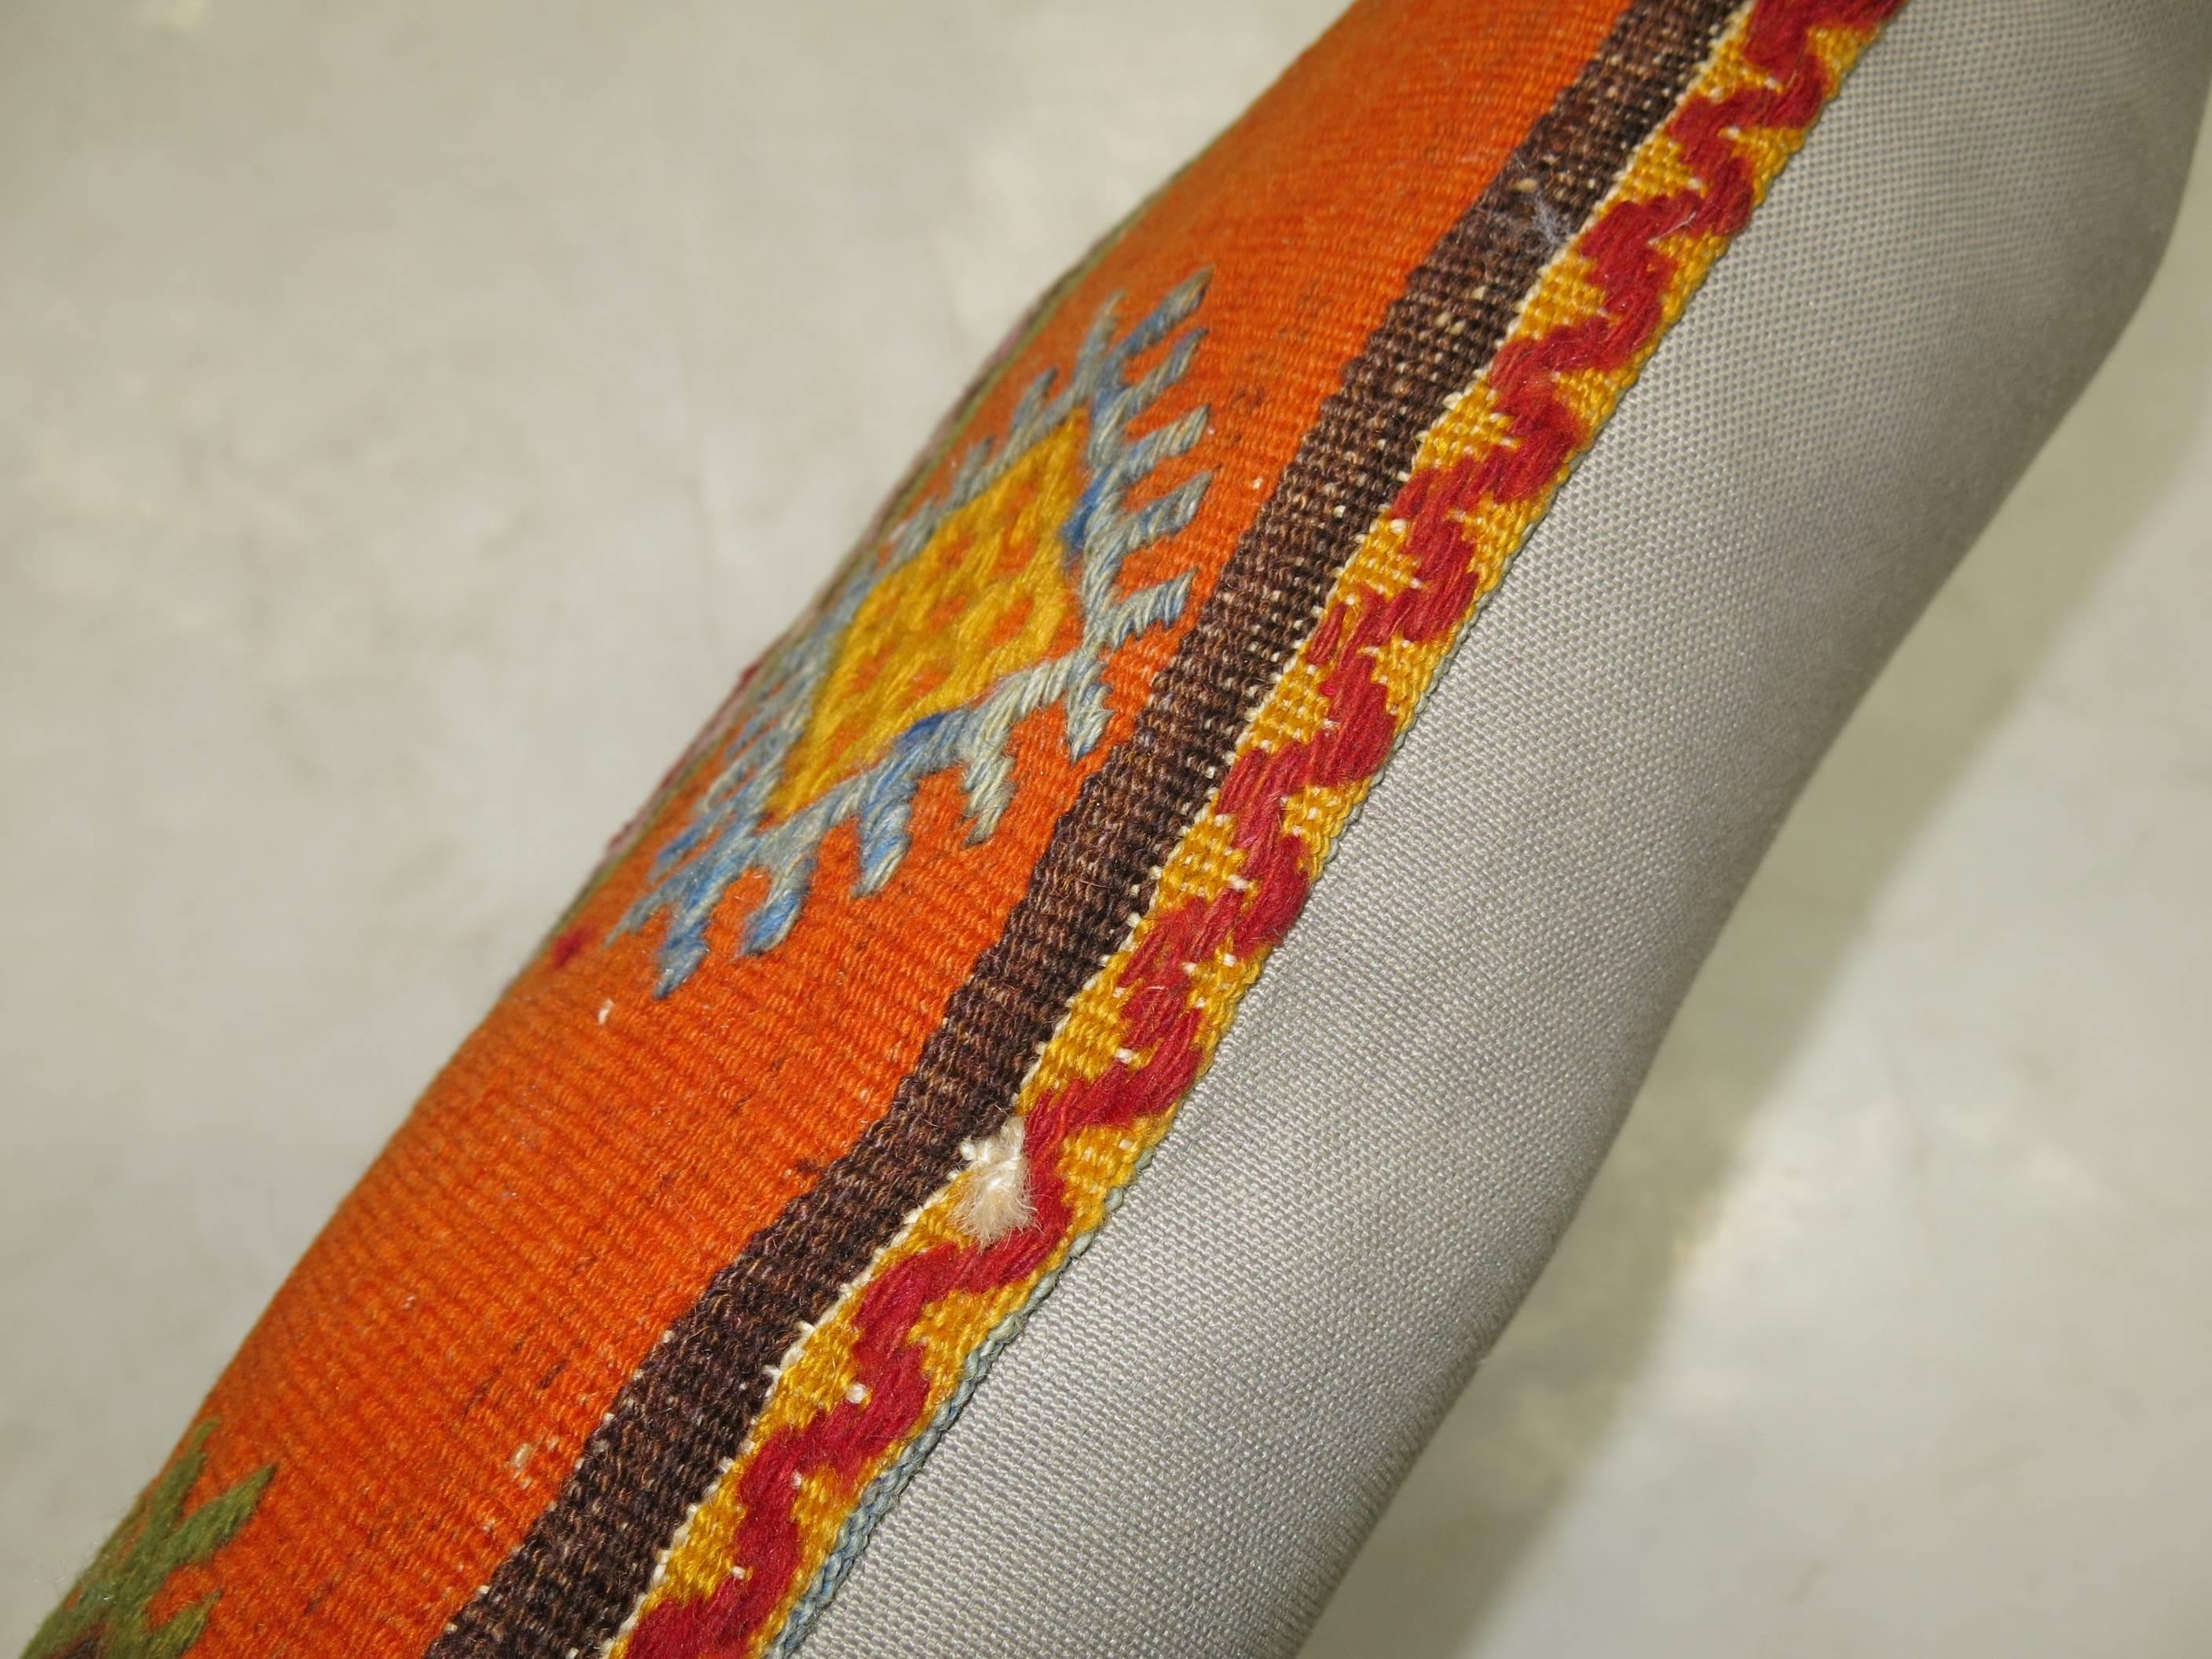 Pillow made from a vintage turkish kilim with  cotton back. Zipper closure and foam insert provided. 19'' x 20''